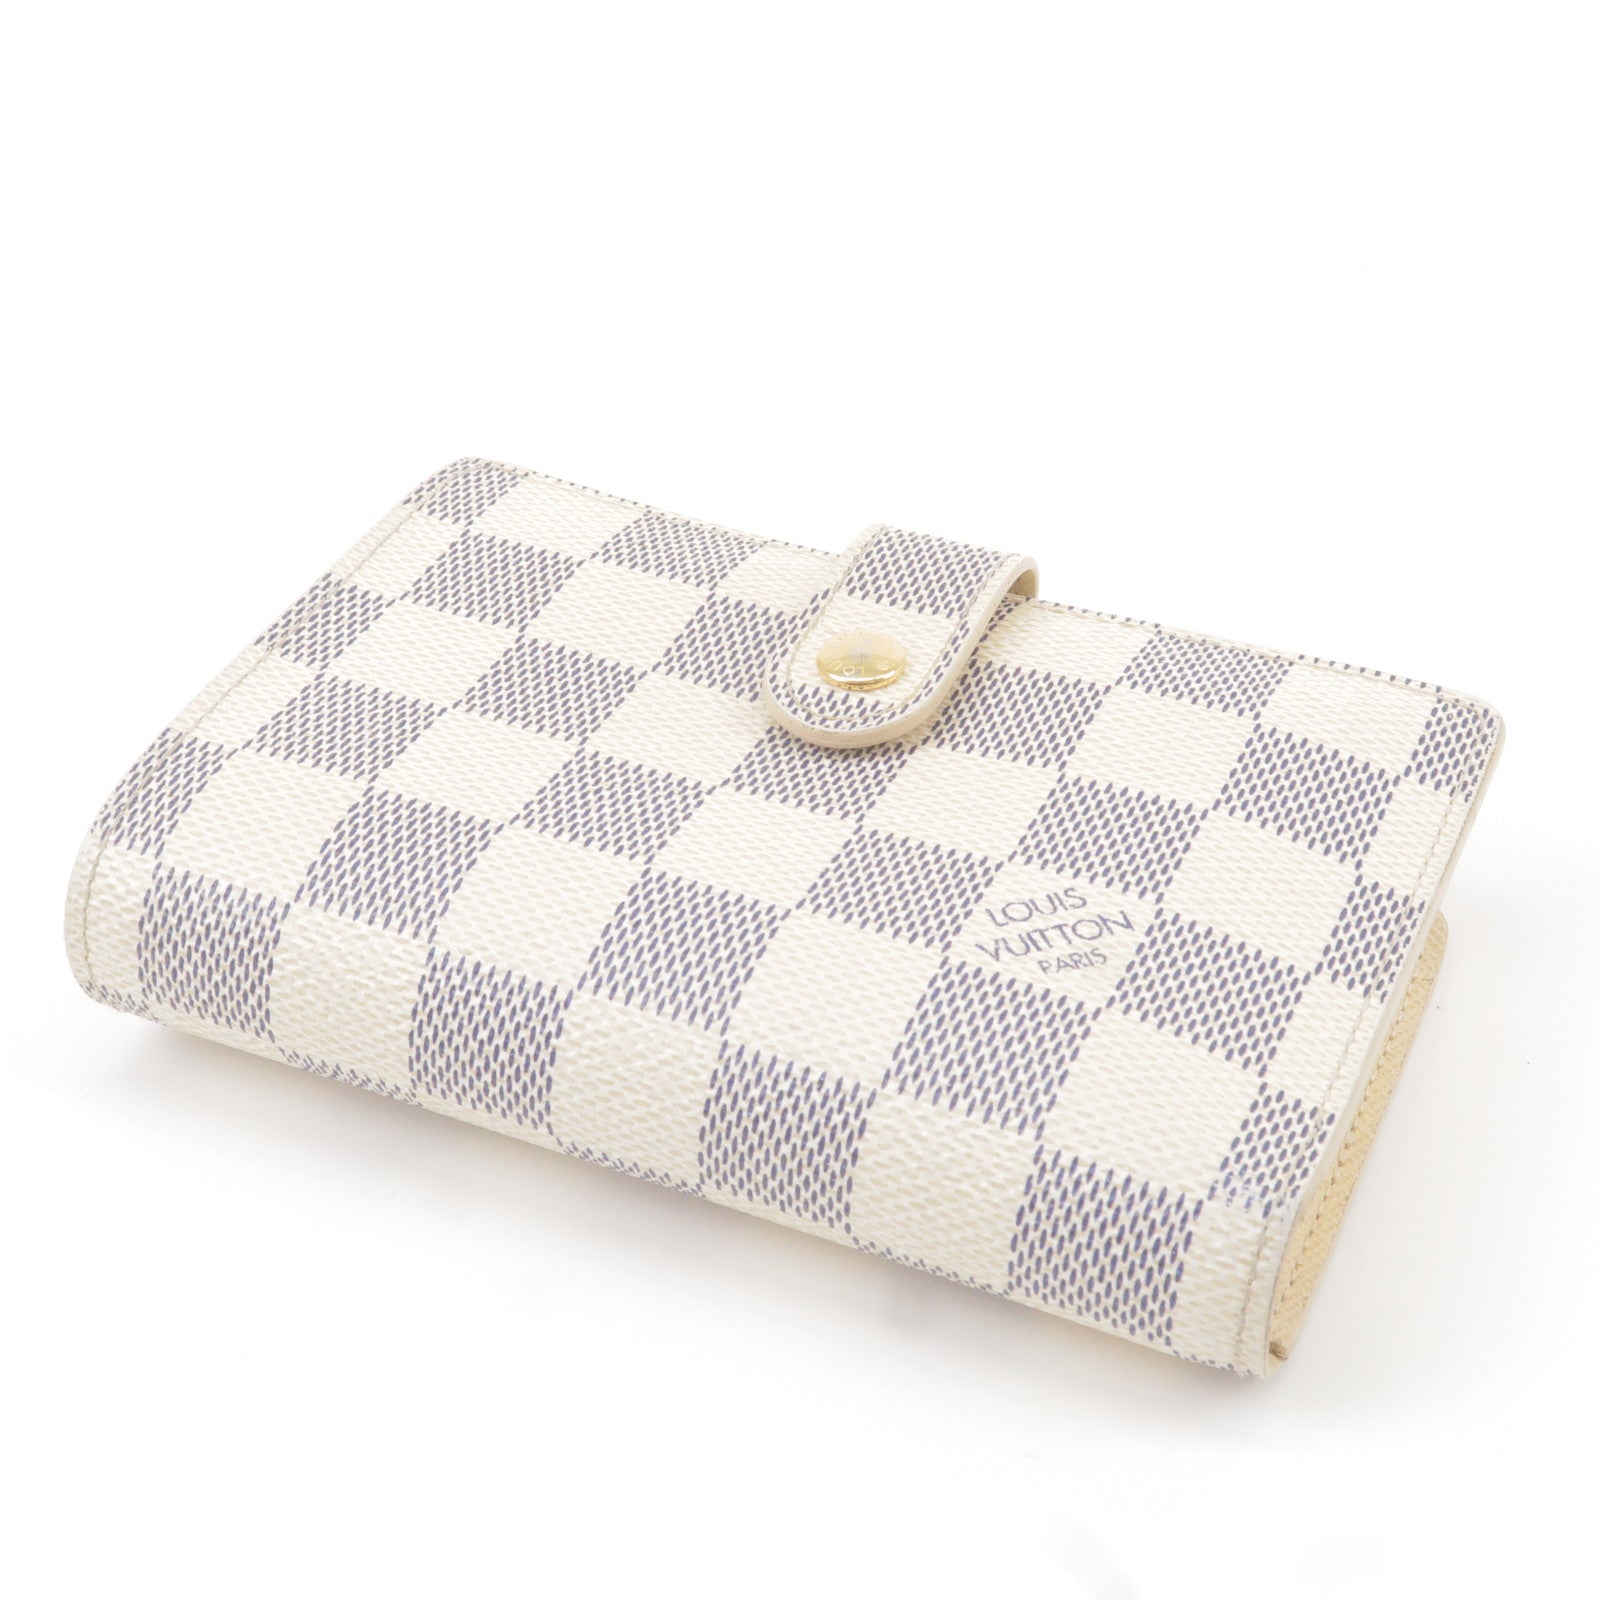 Louis Vuitton Damier Azur Portefeuille Viennois Wallet N61676 Used from  Japan